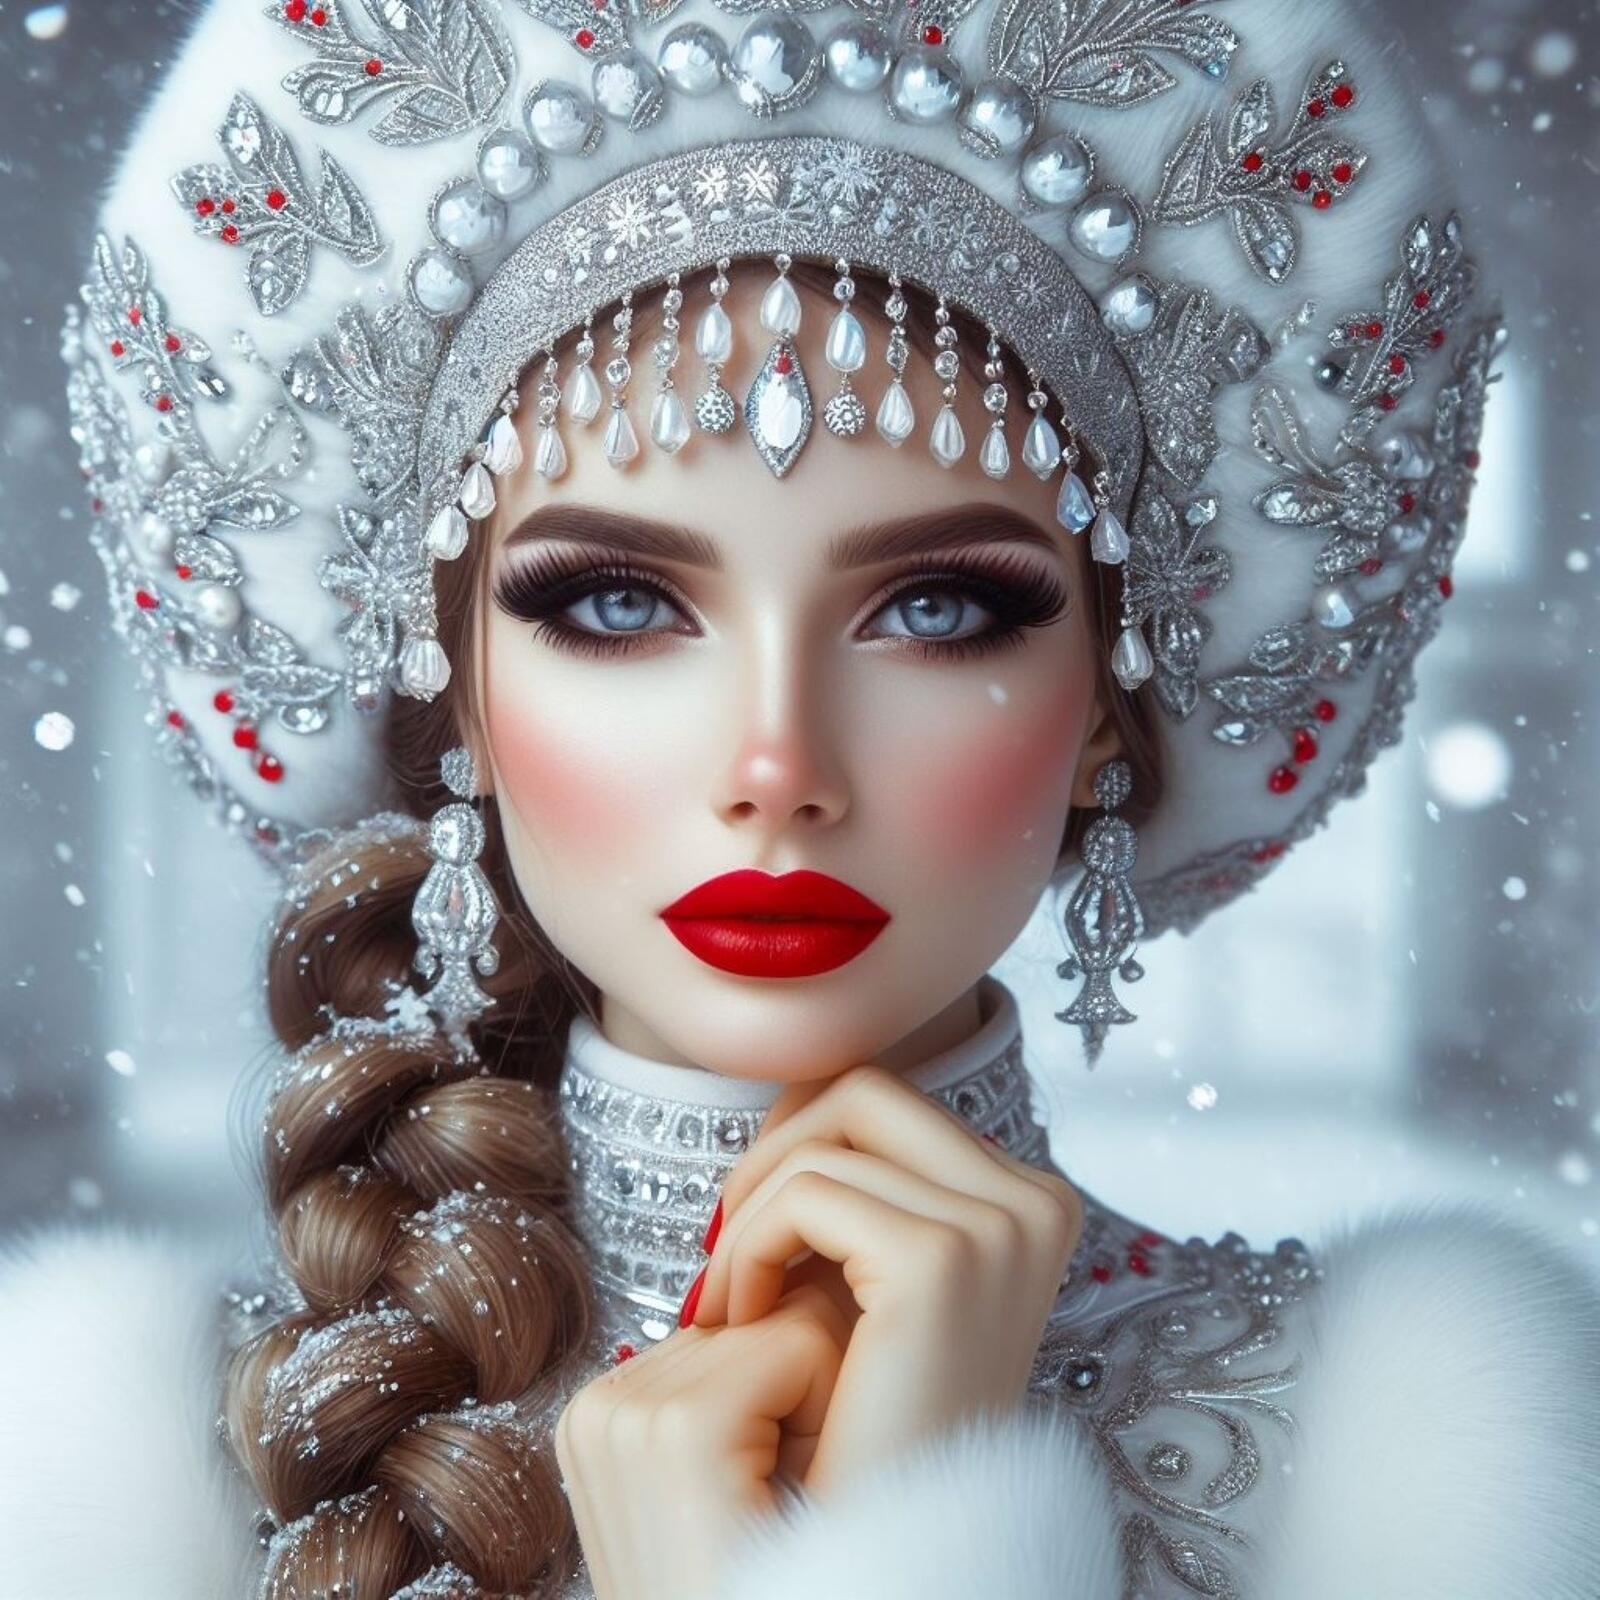 Free photo The look of the snow maiden